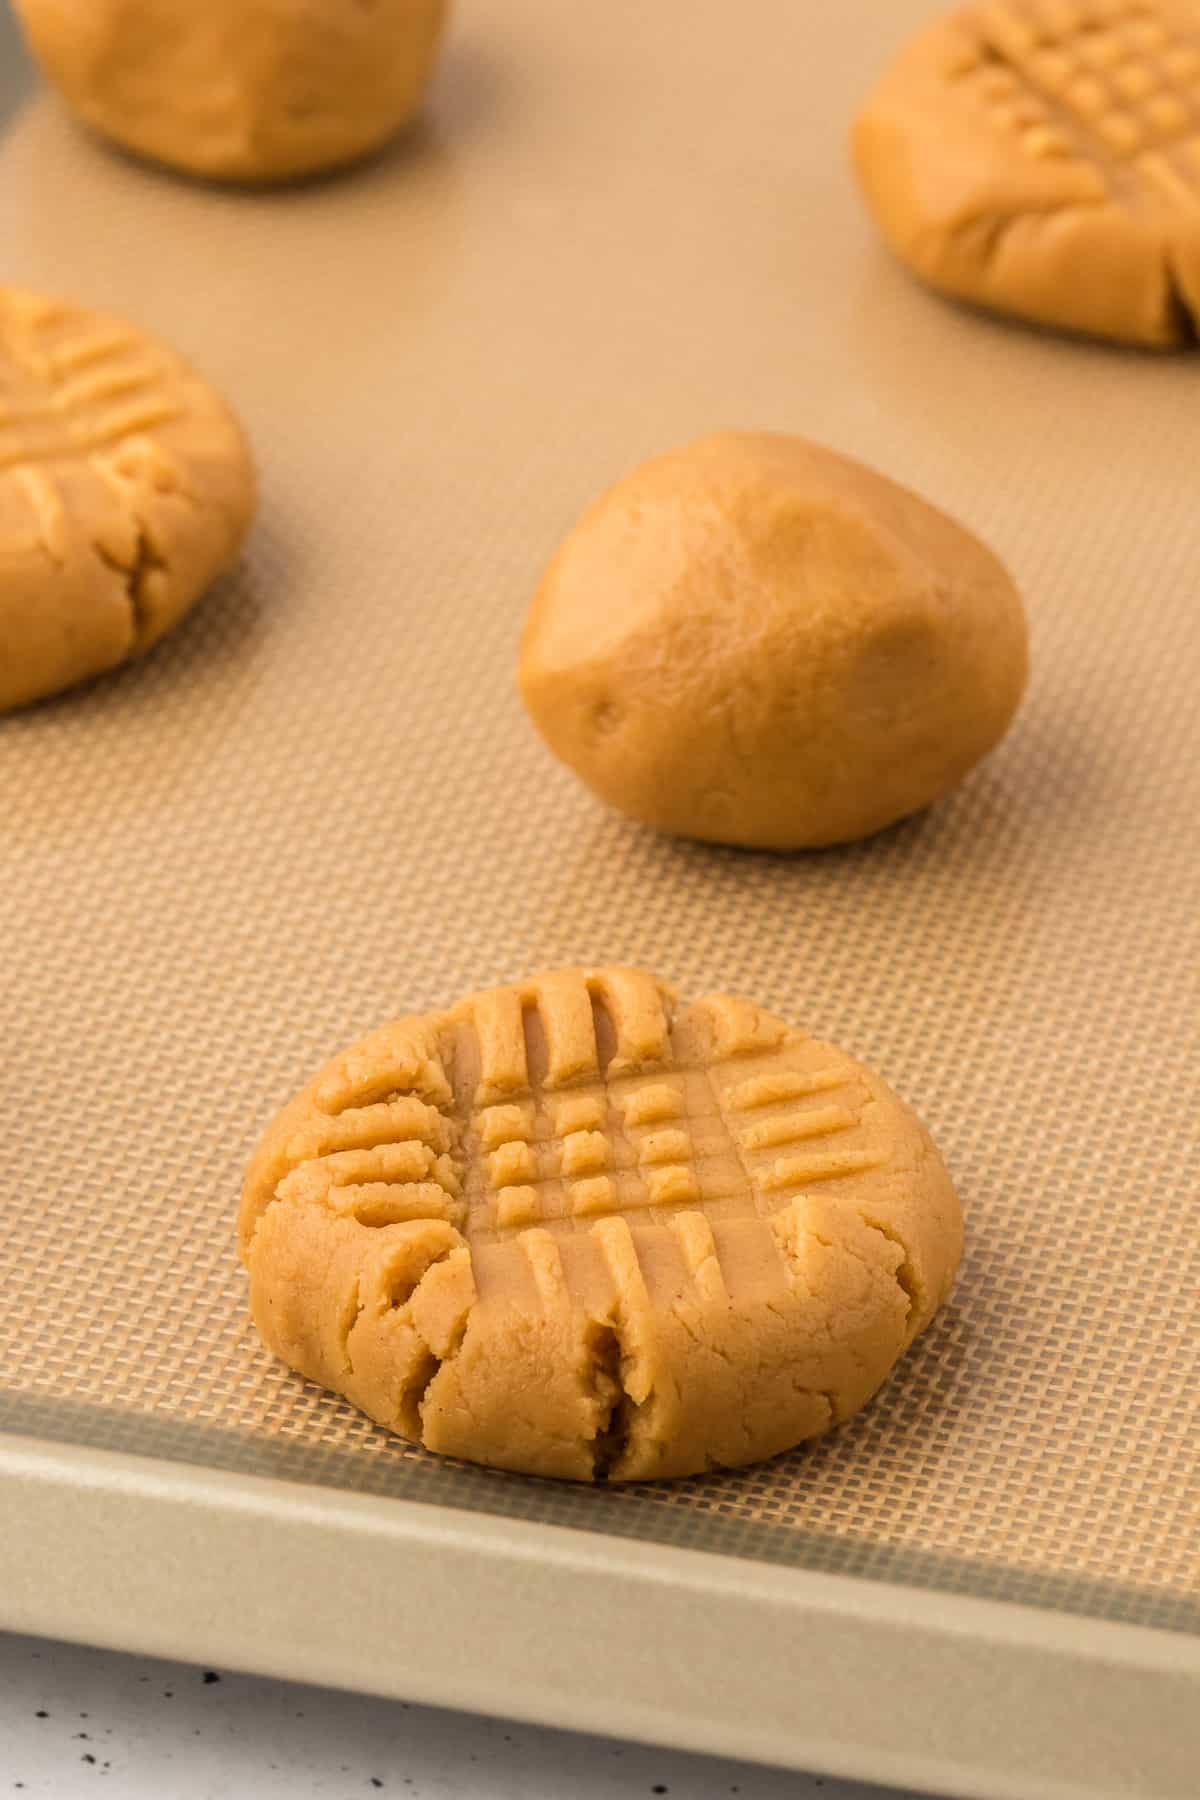 gluten free peanut butter cookie dough balls on a lined baking sheet, some pressed down into a cross hatch pattern and some still in ball form